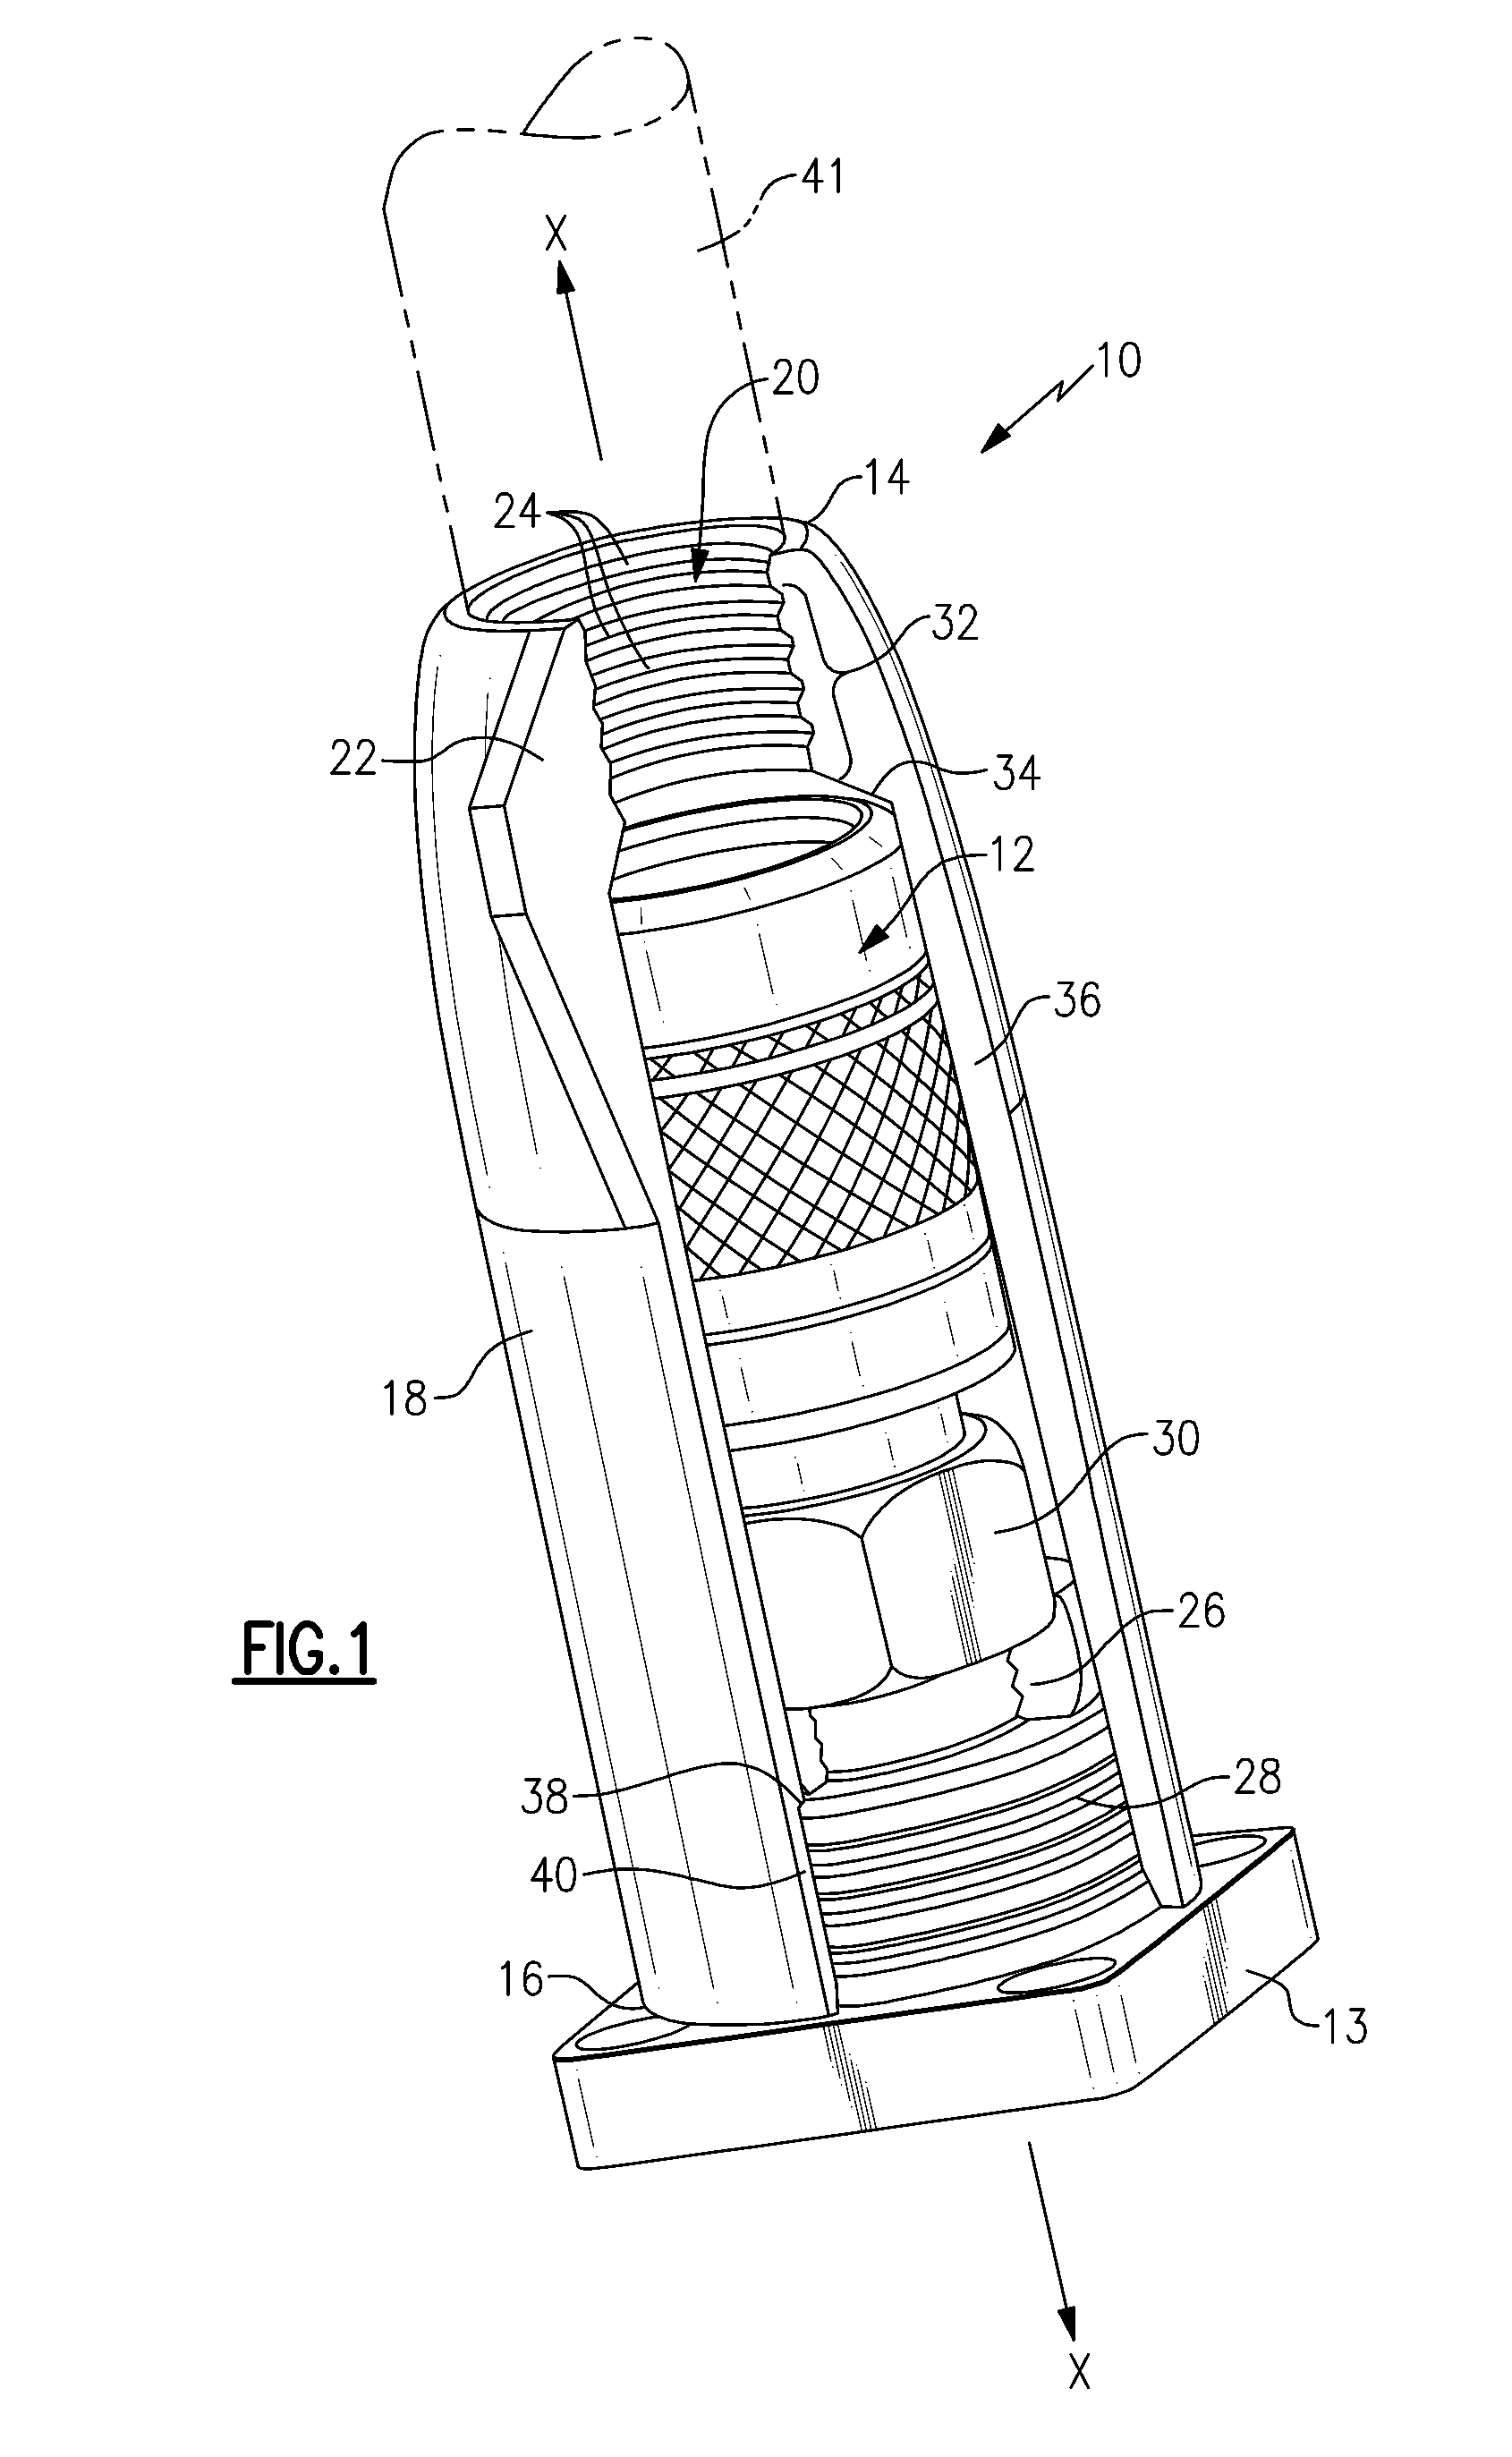 Cover for cable connectors